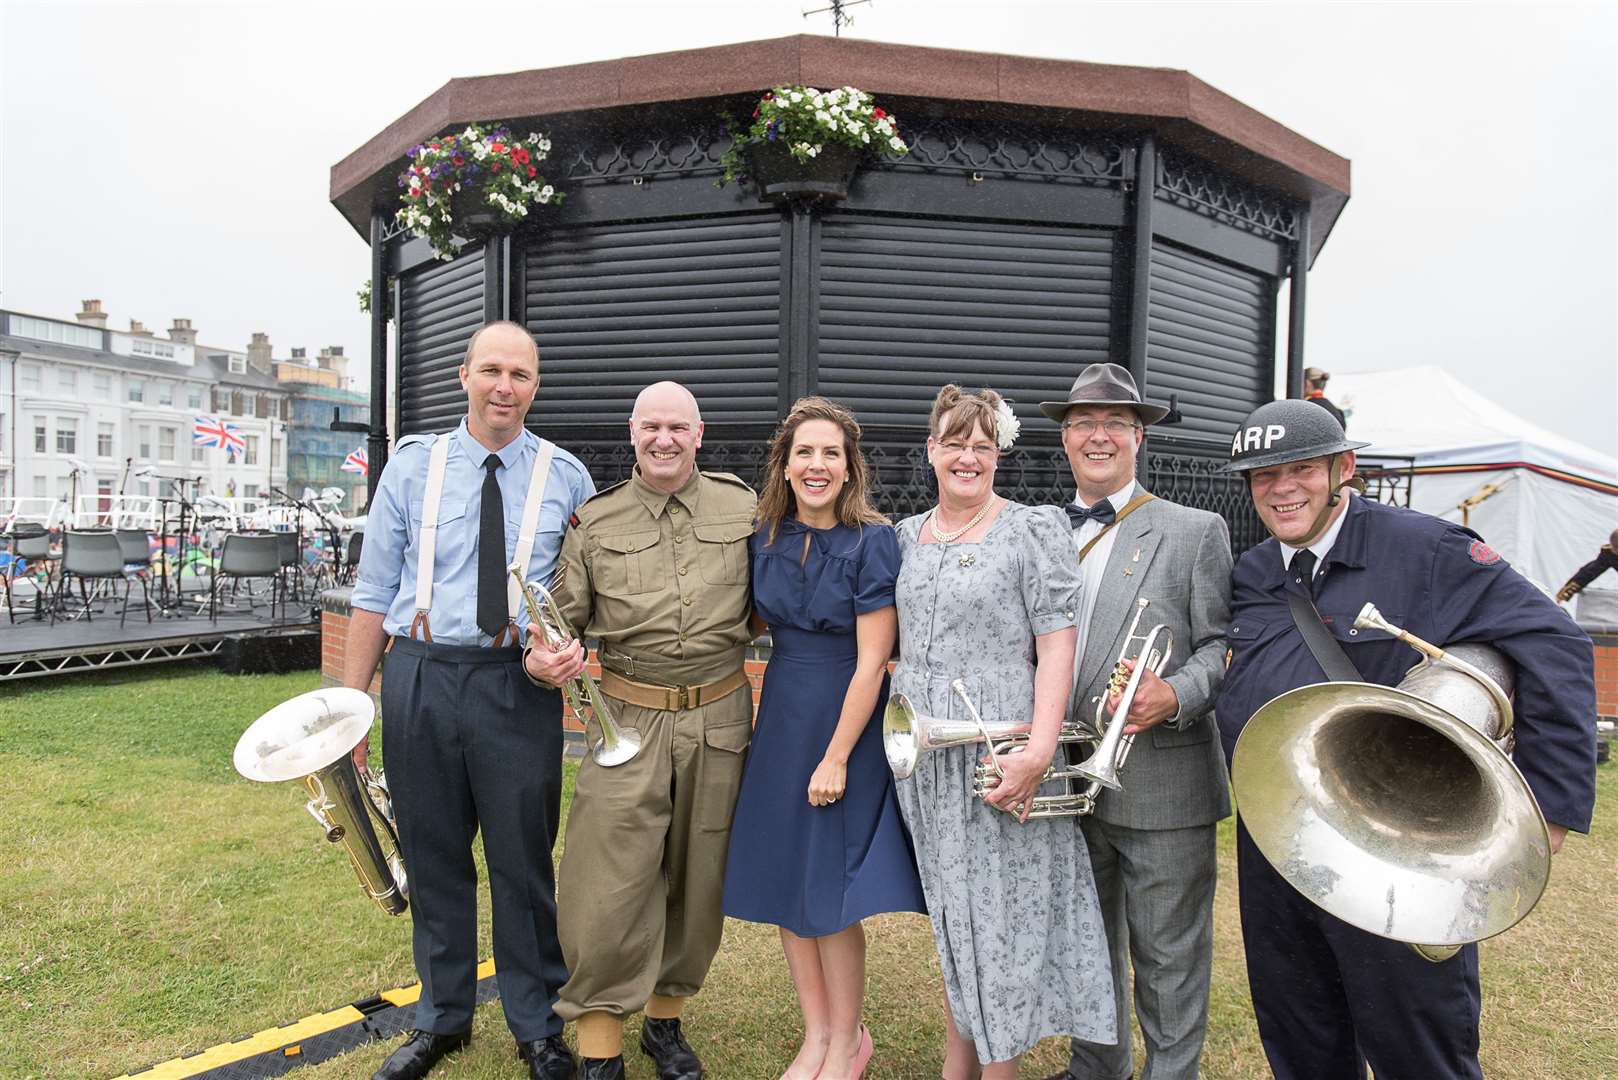 The Victory Wartime Band will provide music at the VJ Day Commemorative service by the Burma Star Association in Deal